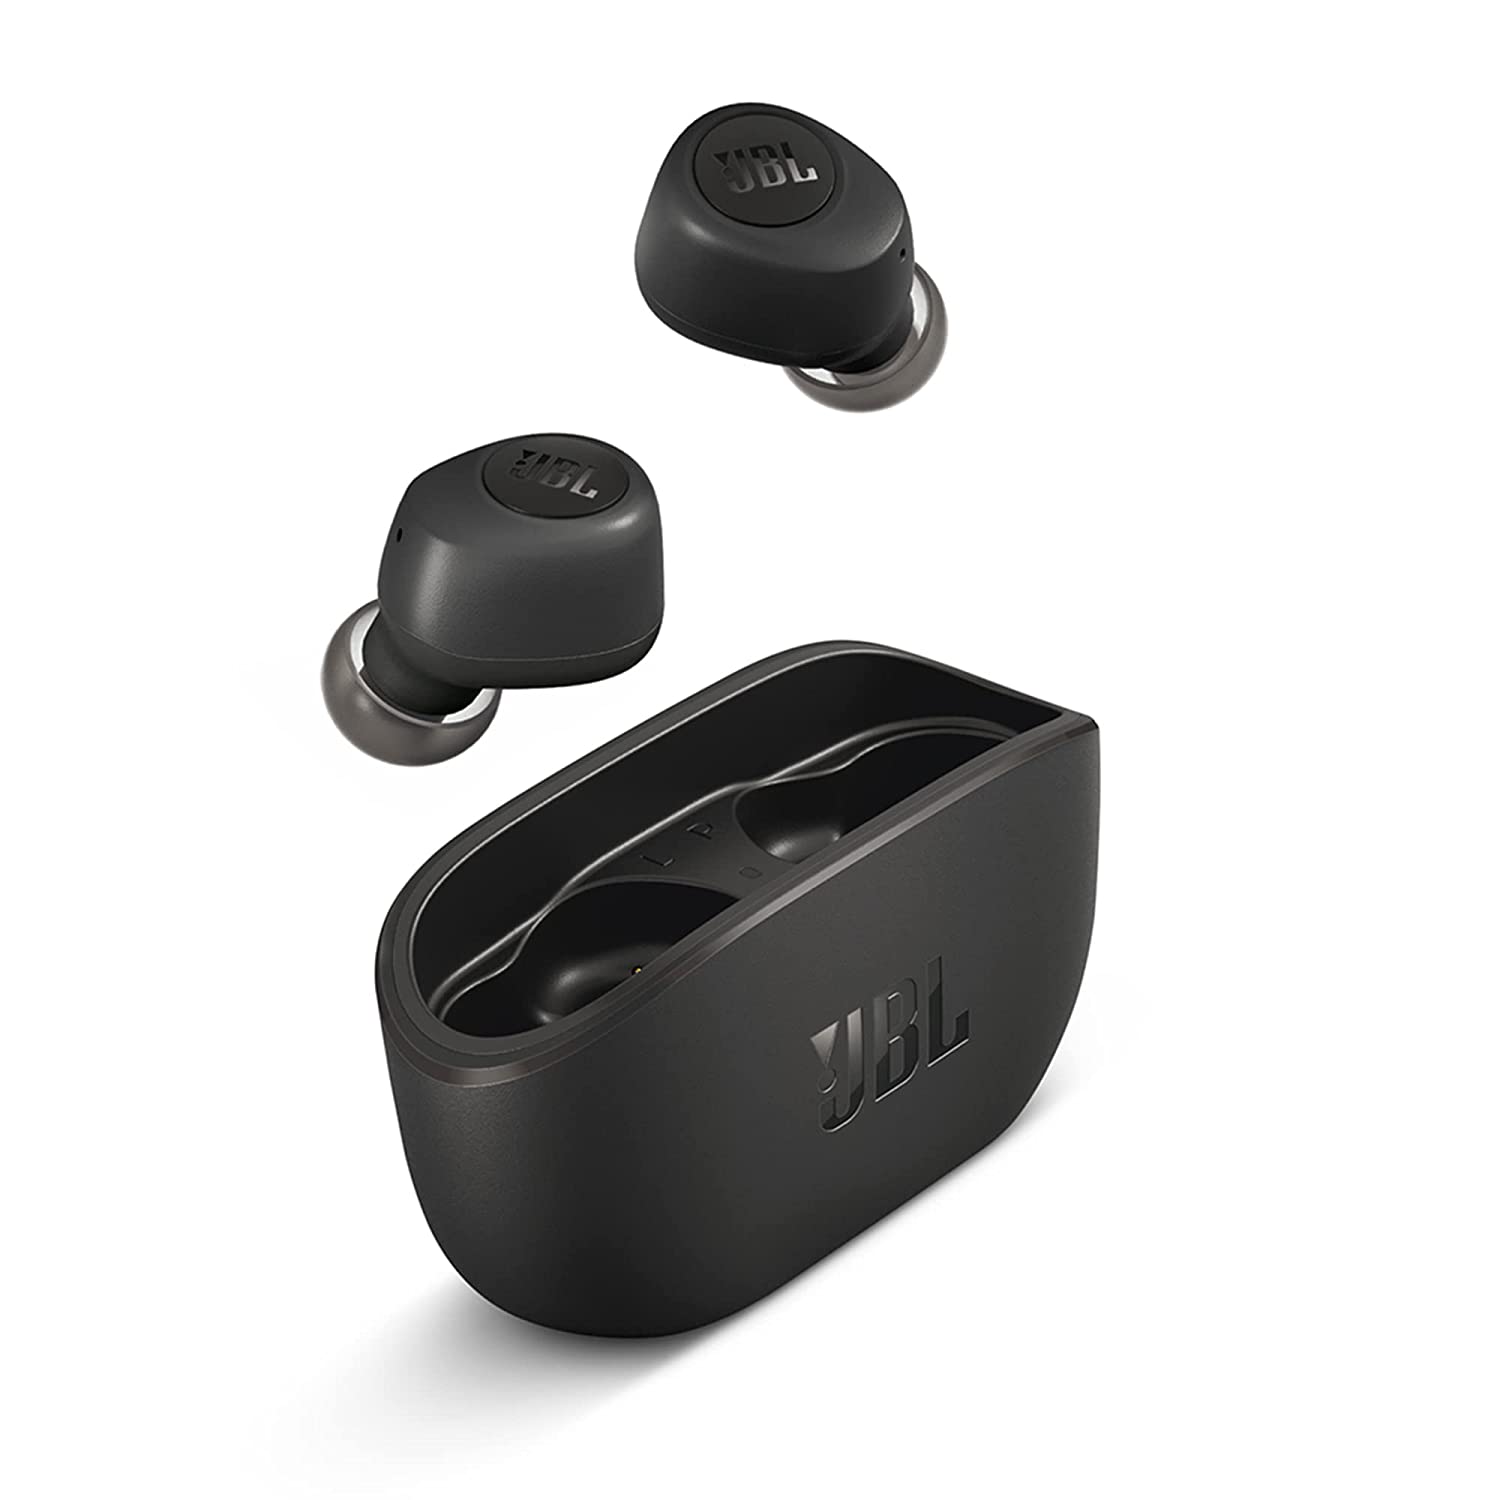 Jbl Wave 100 Bluetooth Truly Wireless in Ear Earbuds with Mic, 20 Hours Playtime, Deep Bass Sound, Use Single Earbud Or Both, Bluetooth 5.0, Voice Assistant Support for Mobile Phones (Black)